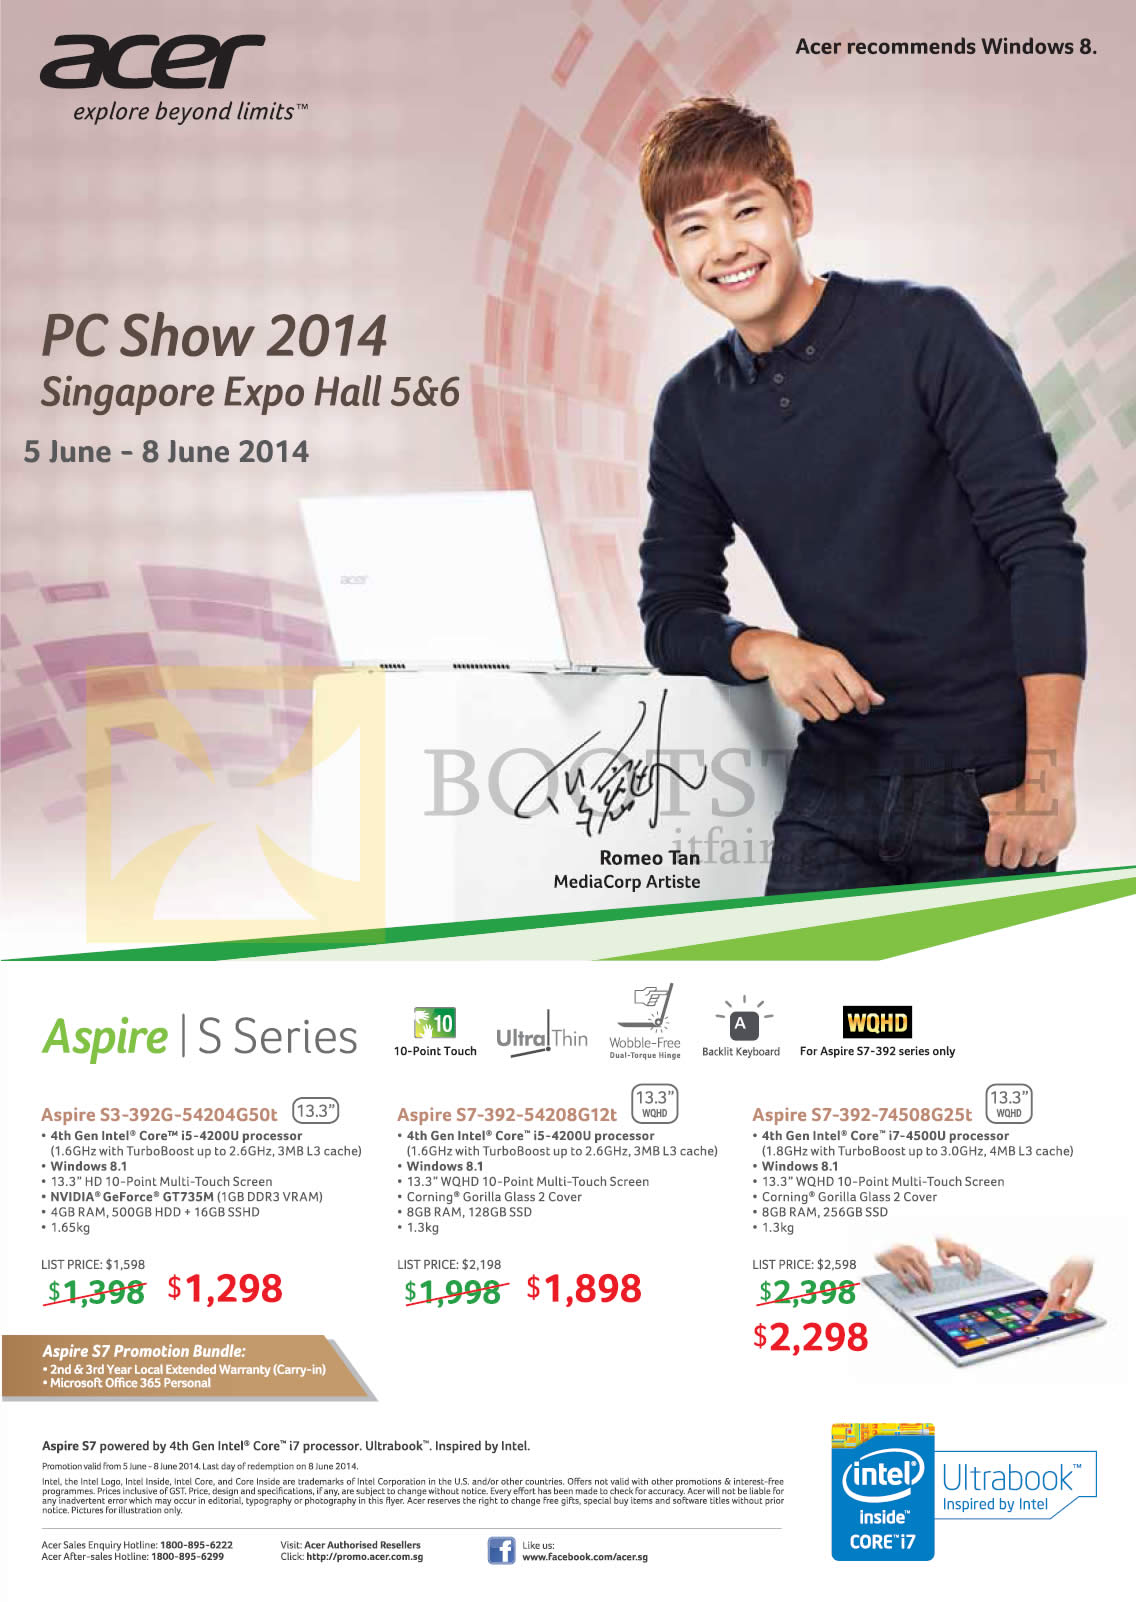 PC SHOW 2014 price list image brochure of Acer Notebooks S3-392G-54204G50t, S7-392-54208G12t, S7-392-74508G25t